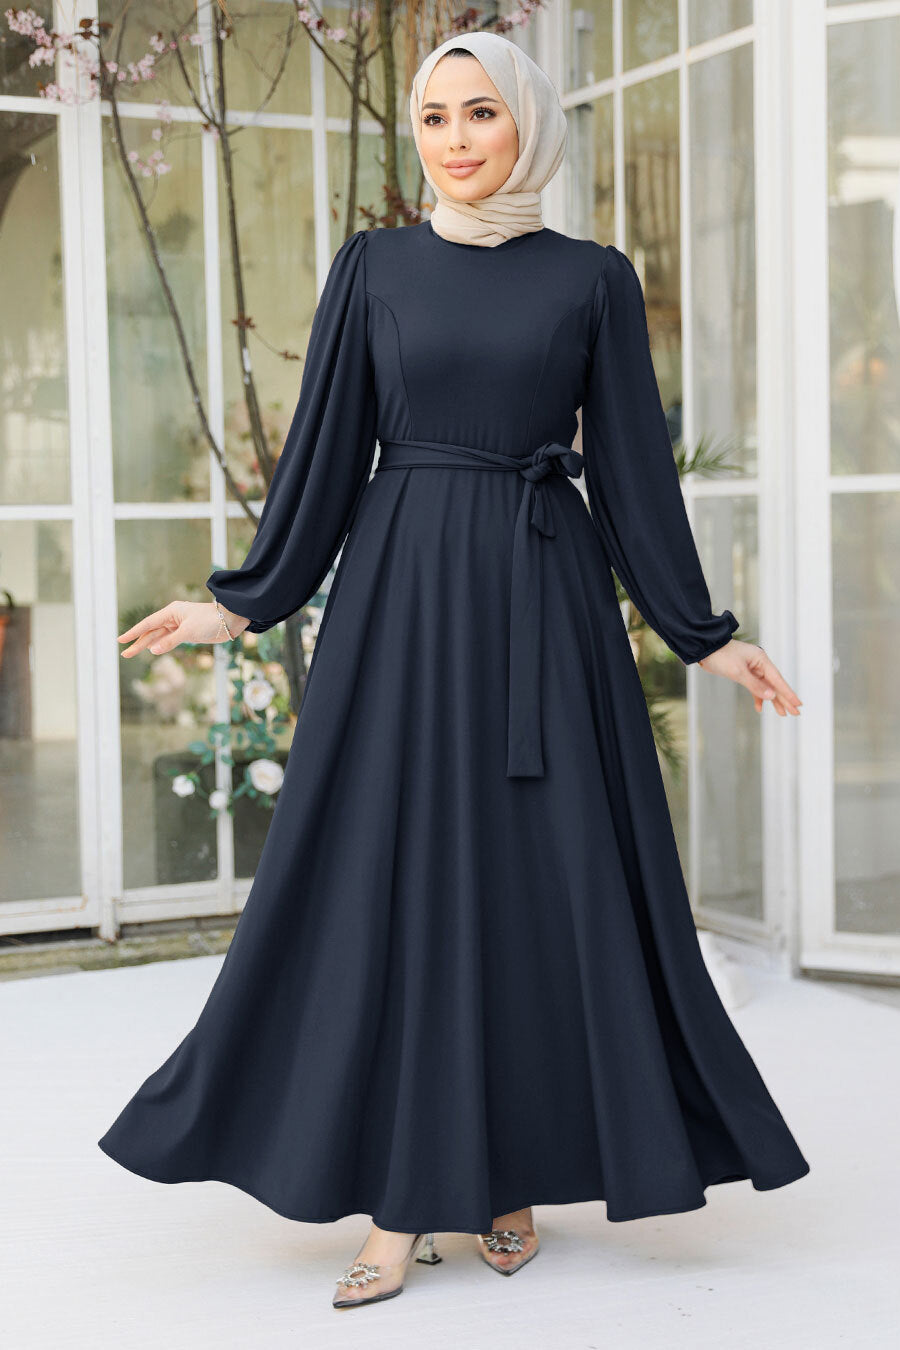 a woman in a black dress with a hijab